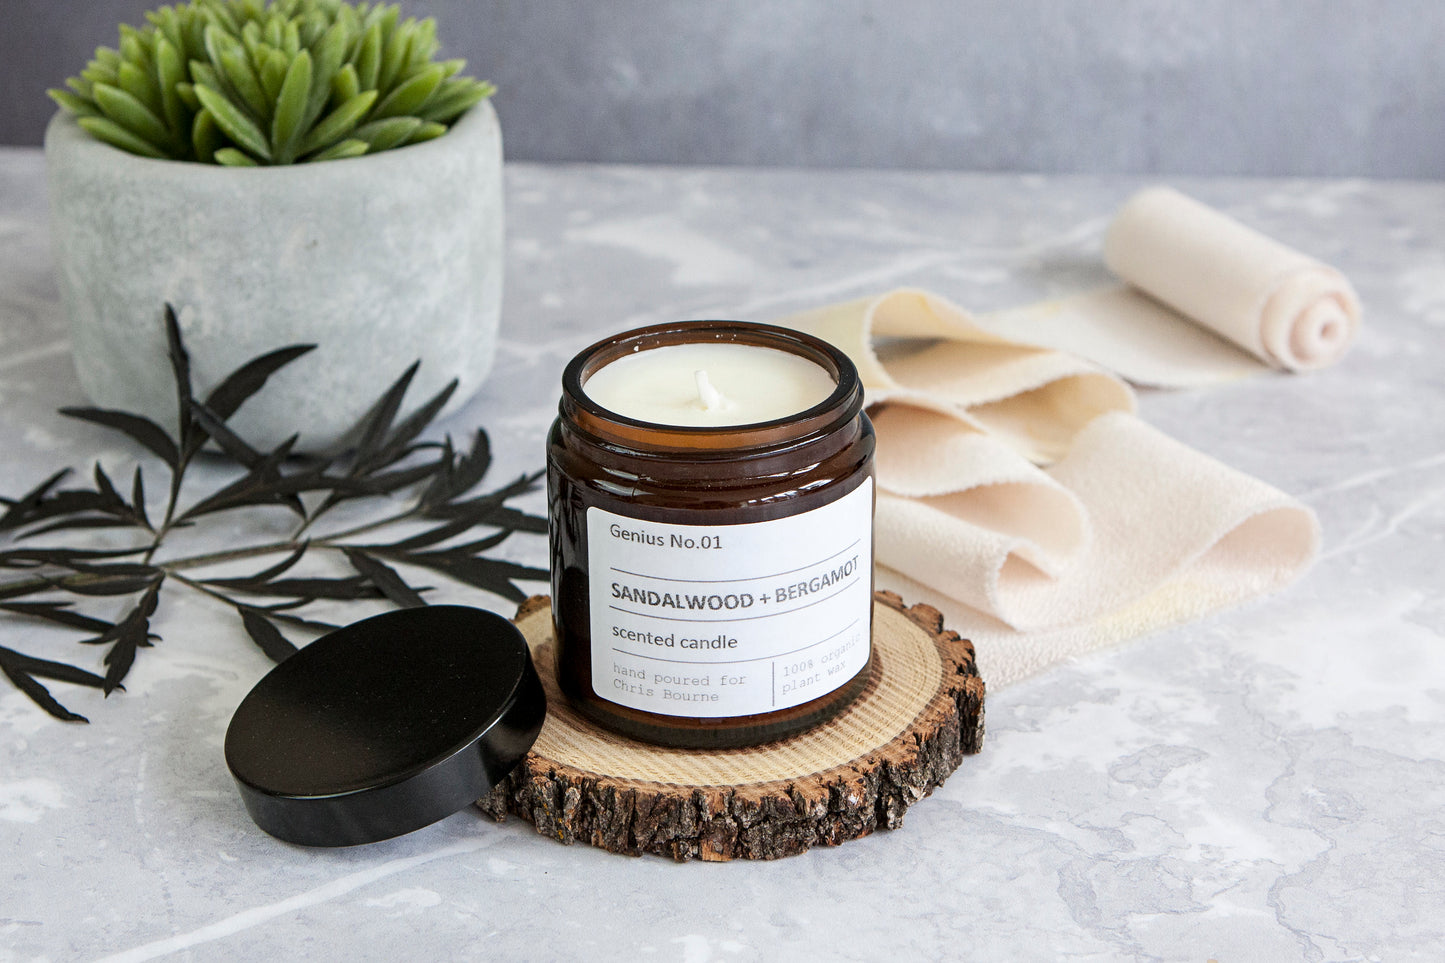 Organic Wellbeing Spa Collection